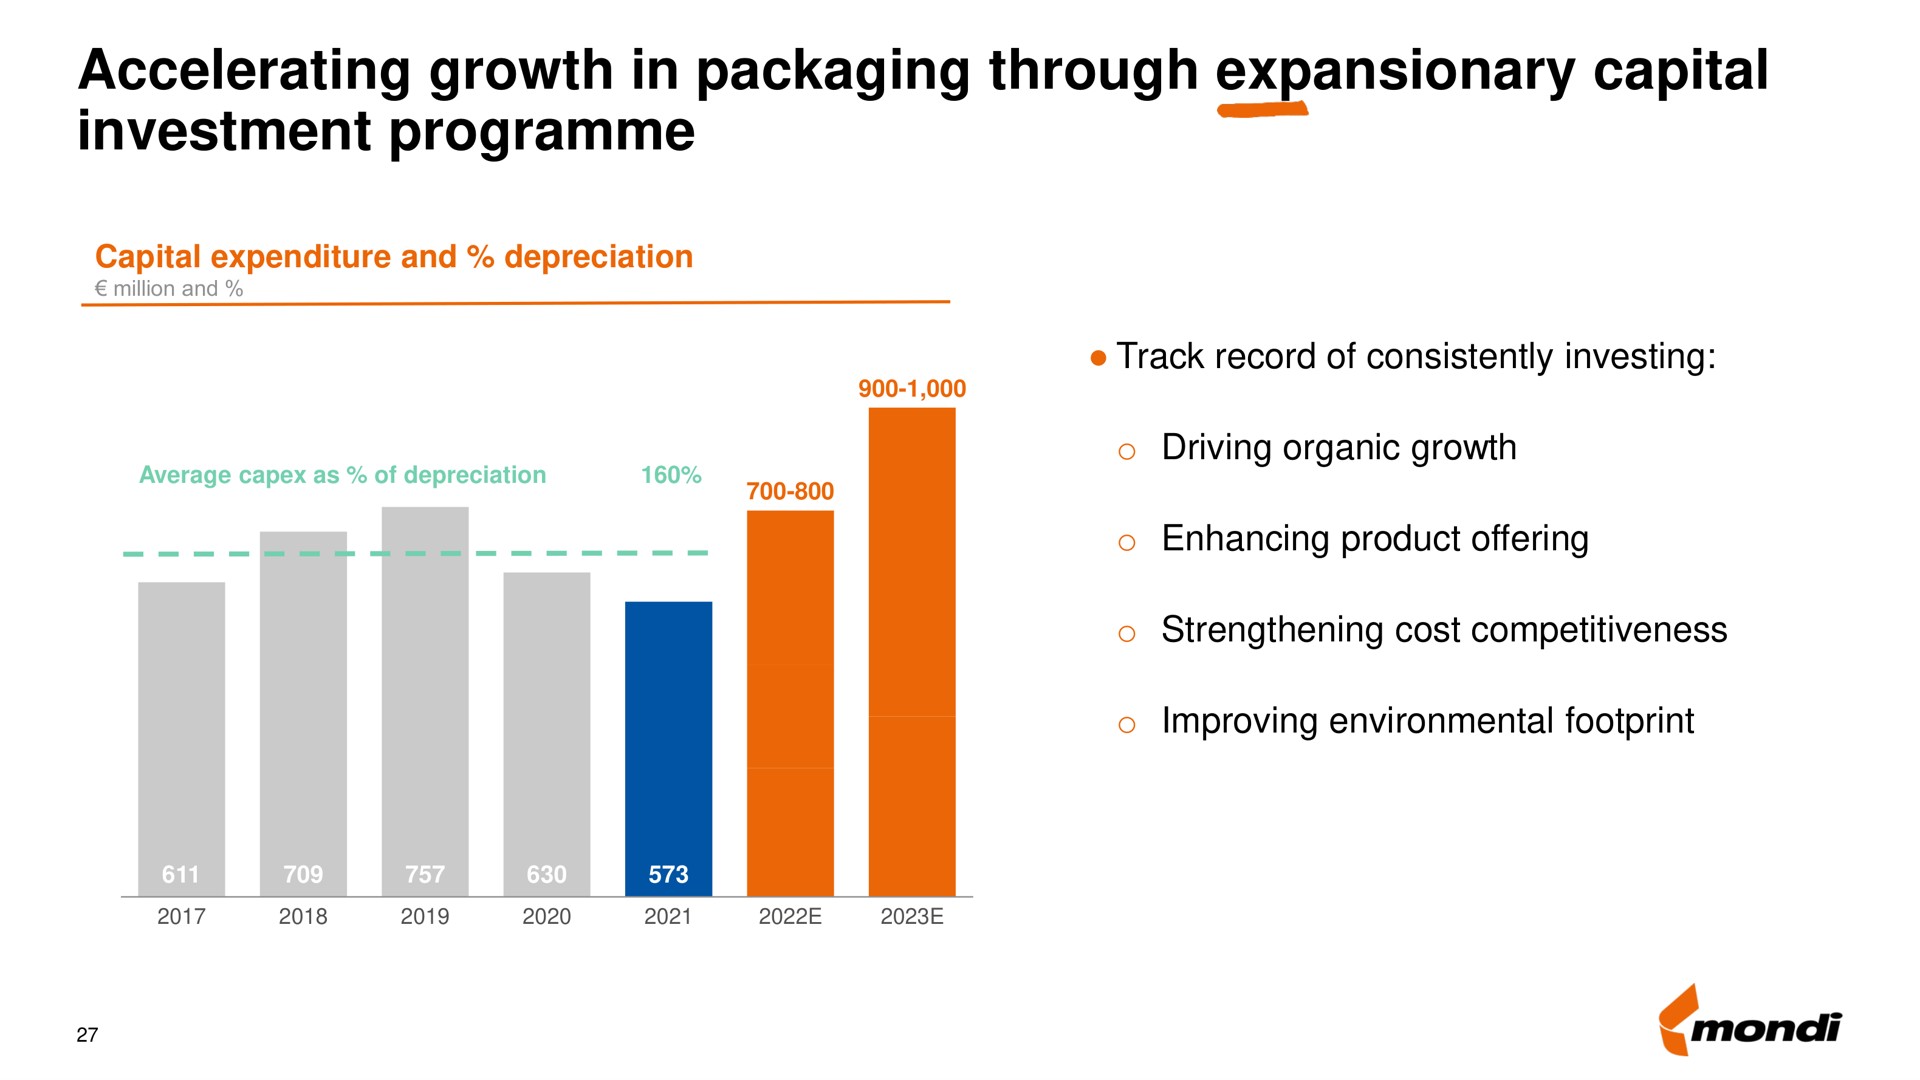 accelerating growth in packaging through expansionary capital investment | Mondi